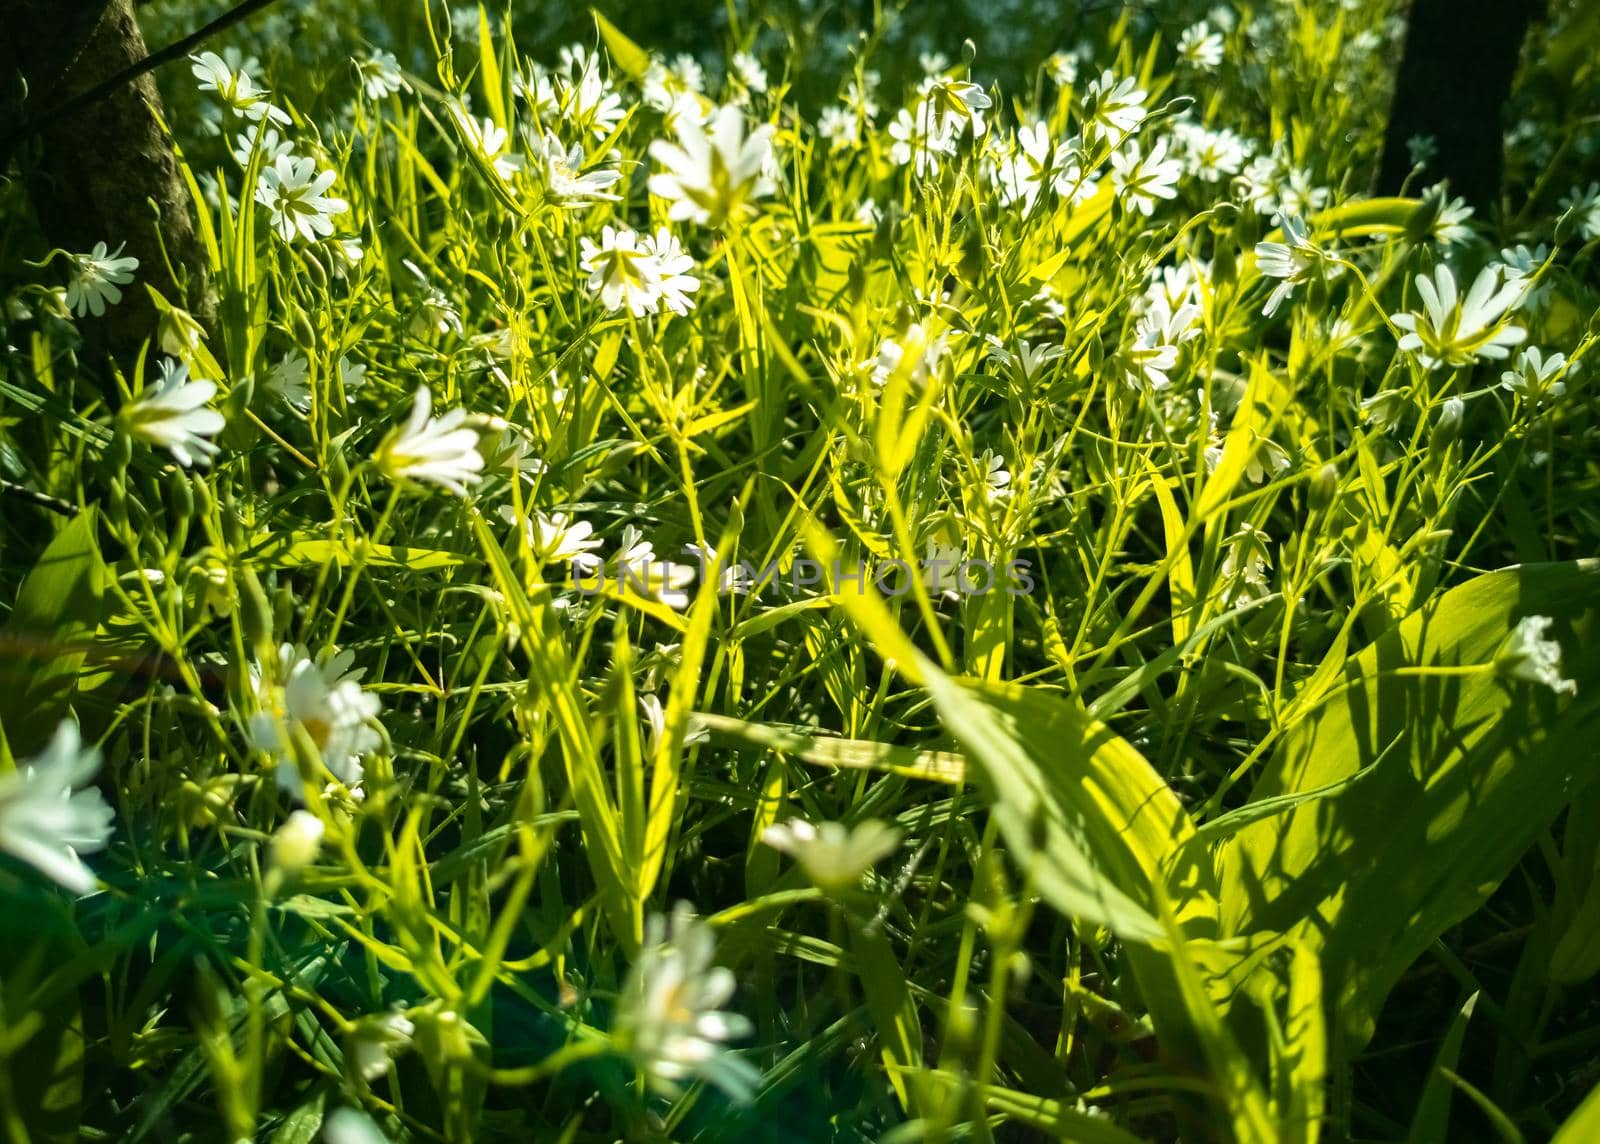 white wildflowers in greenery in sunlight. close-up creative focus by Mariaprovector